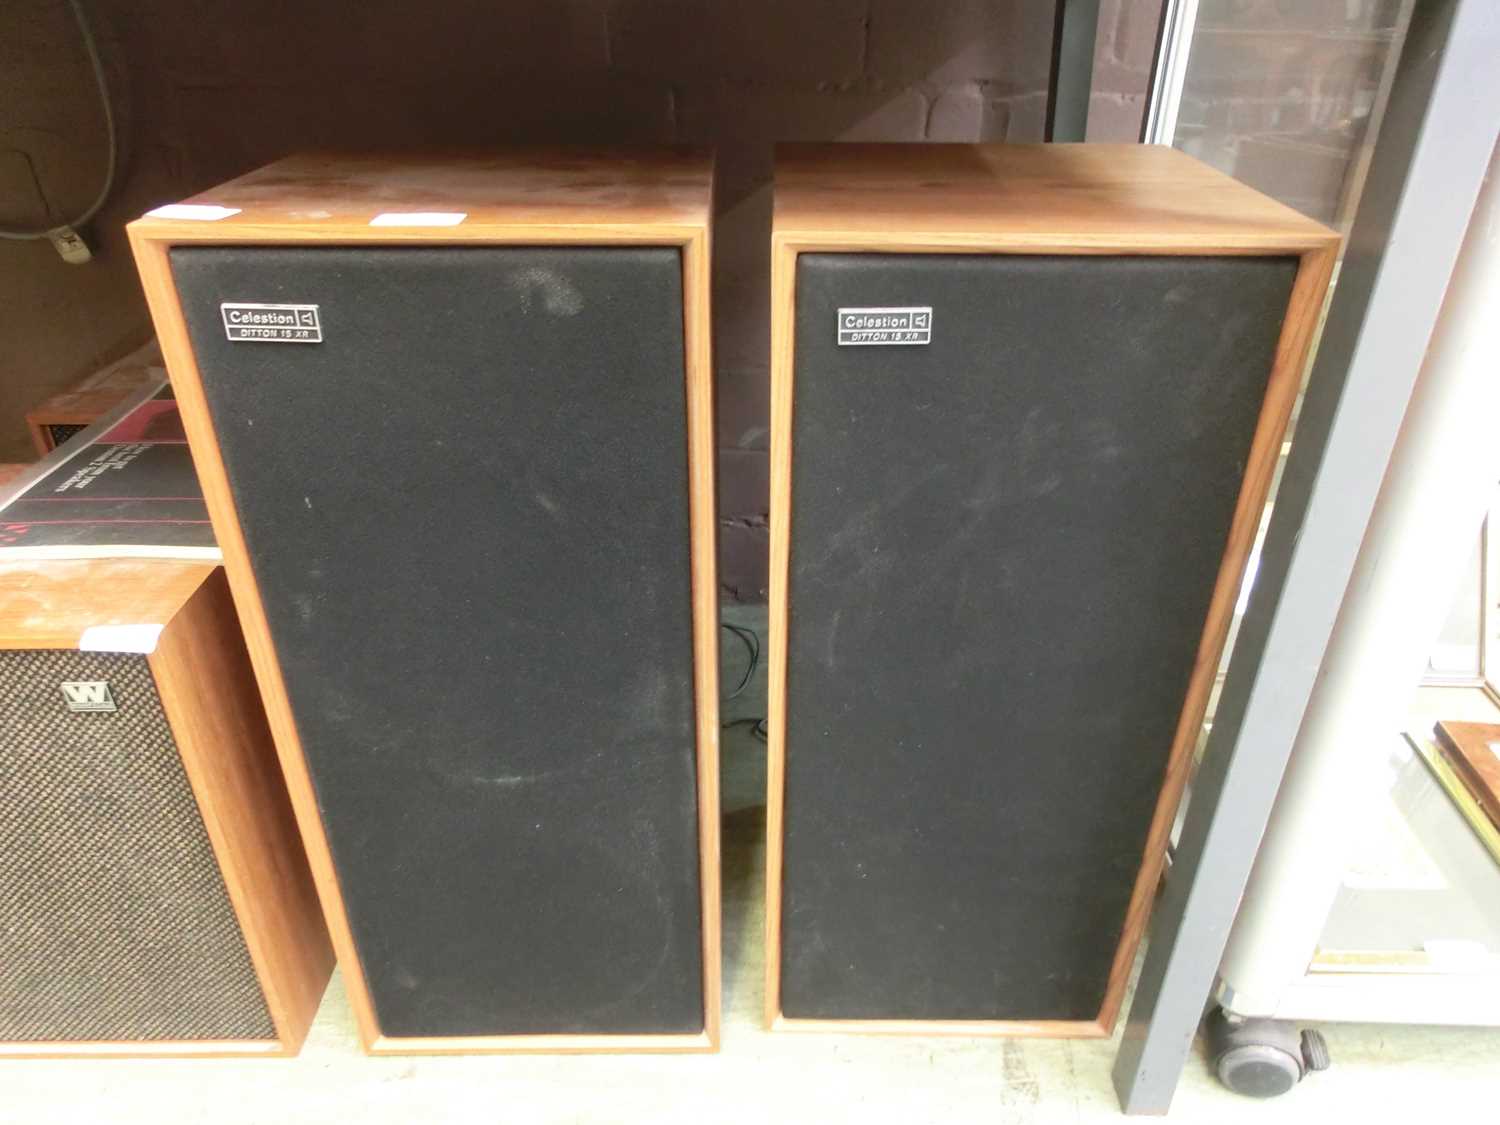 A pair of Celestion Ditton 15XR speakers